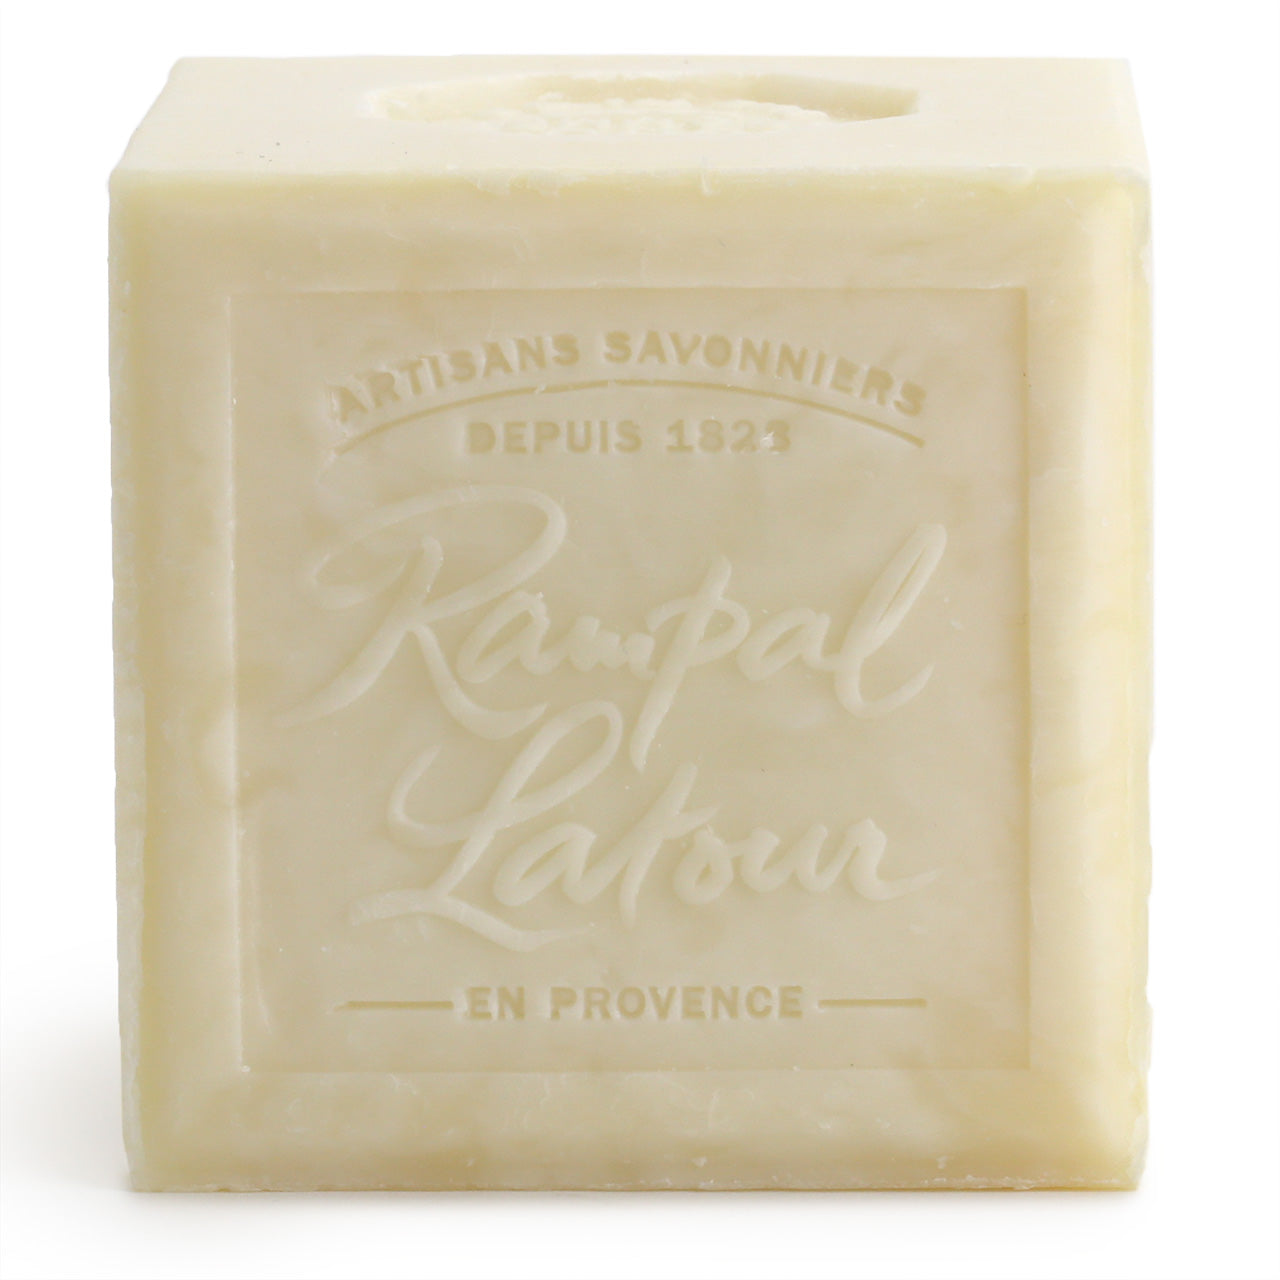 Rampal Latour 600g block of artisan Soap, front view. It's big. You won't want to drop it on your foot!